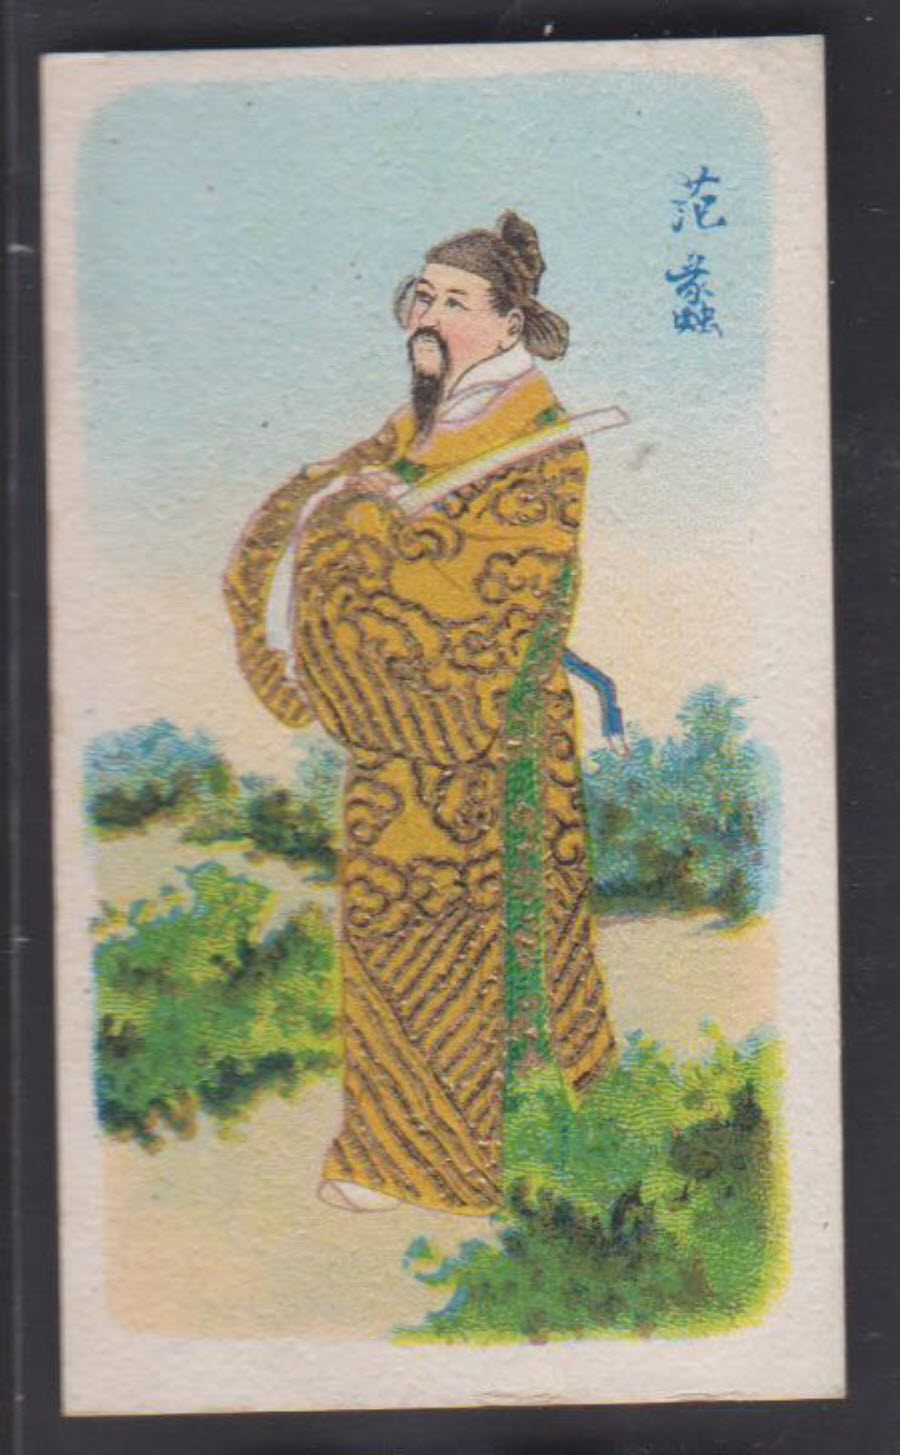 Wills (Pirate) - China's Ancient Warriors - No.32 Fig.98 Wills' Issues Book